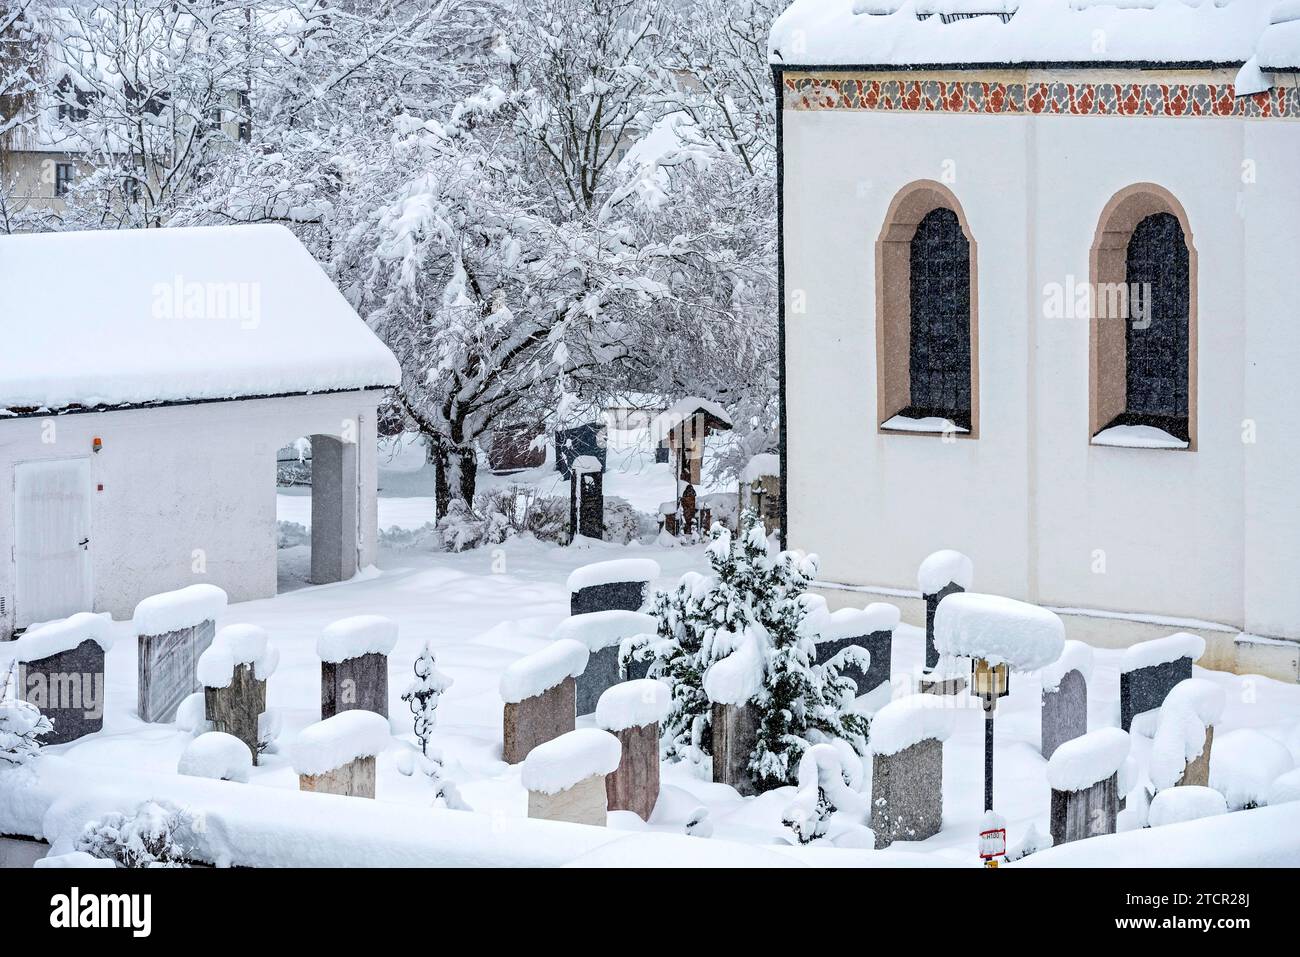 Cemetery at St Martin's parish church, late Middle Ages, snowed in, fresh snow, heavy snowfall, snow chaos, onset of winter, Marzling, Freising Stock Photo